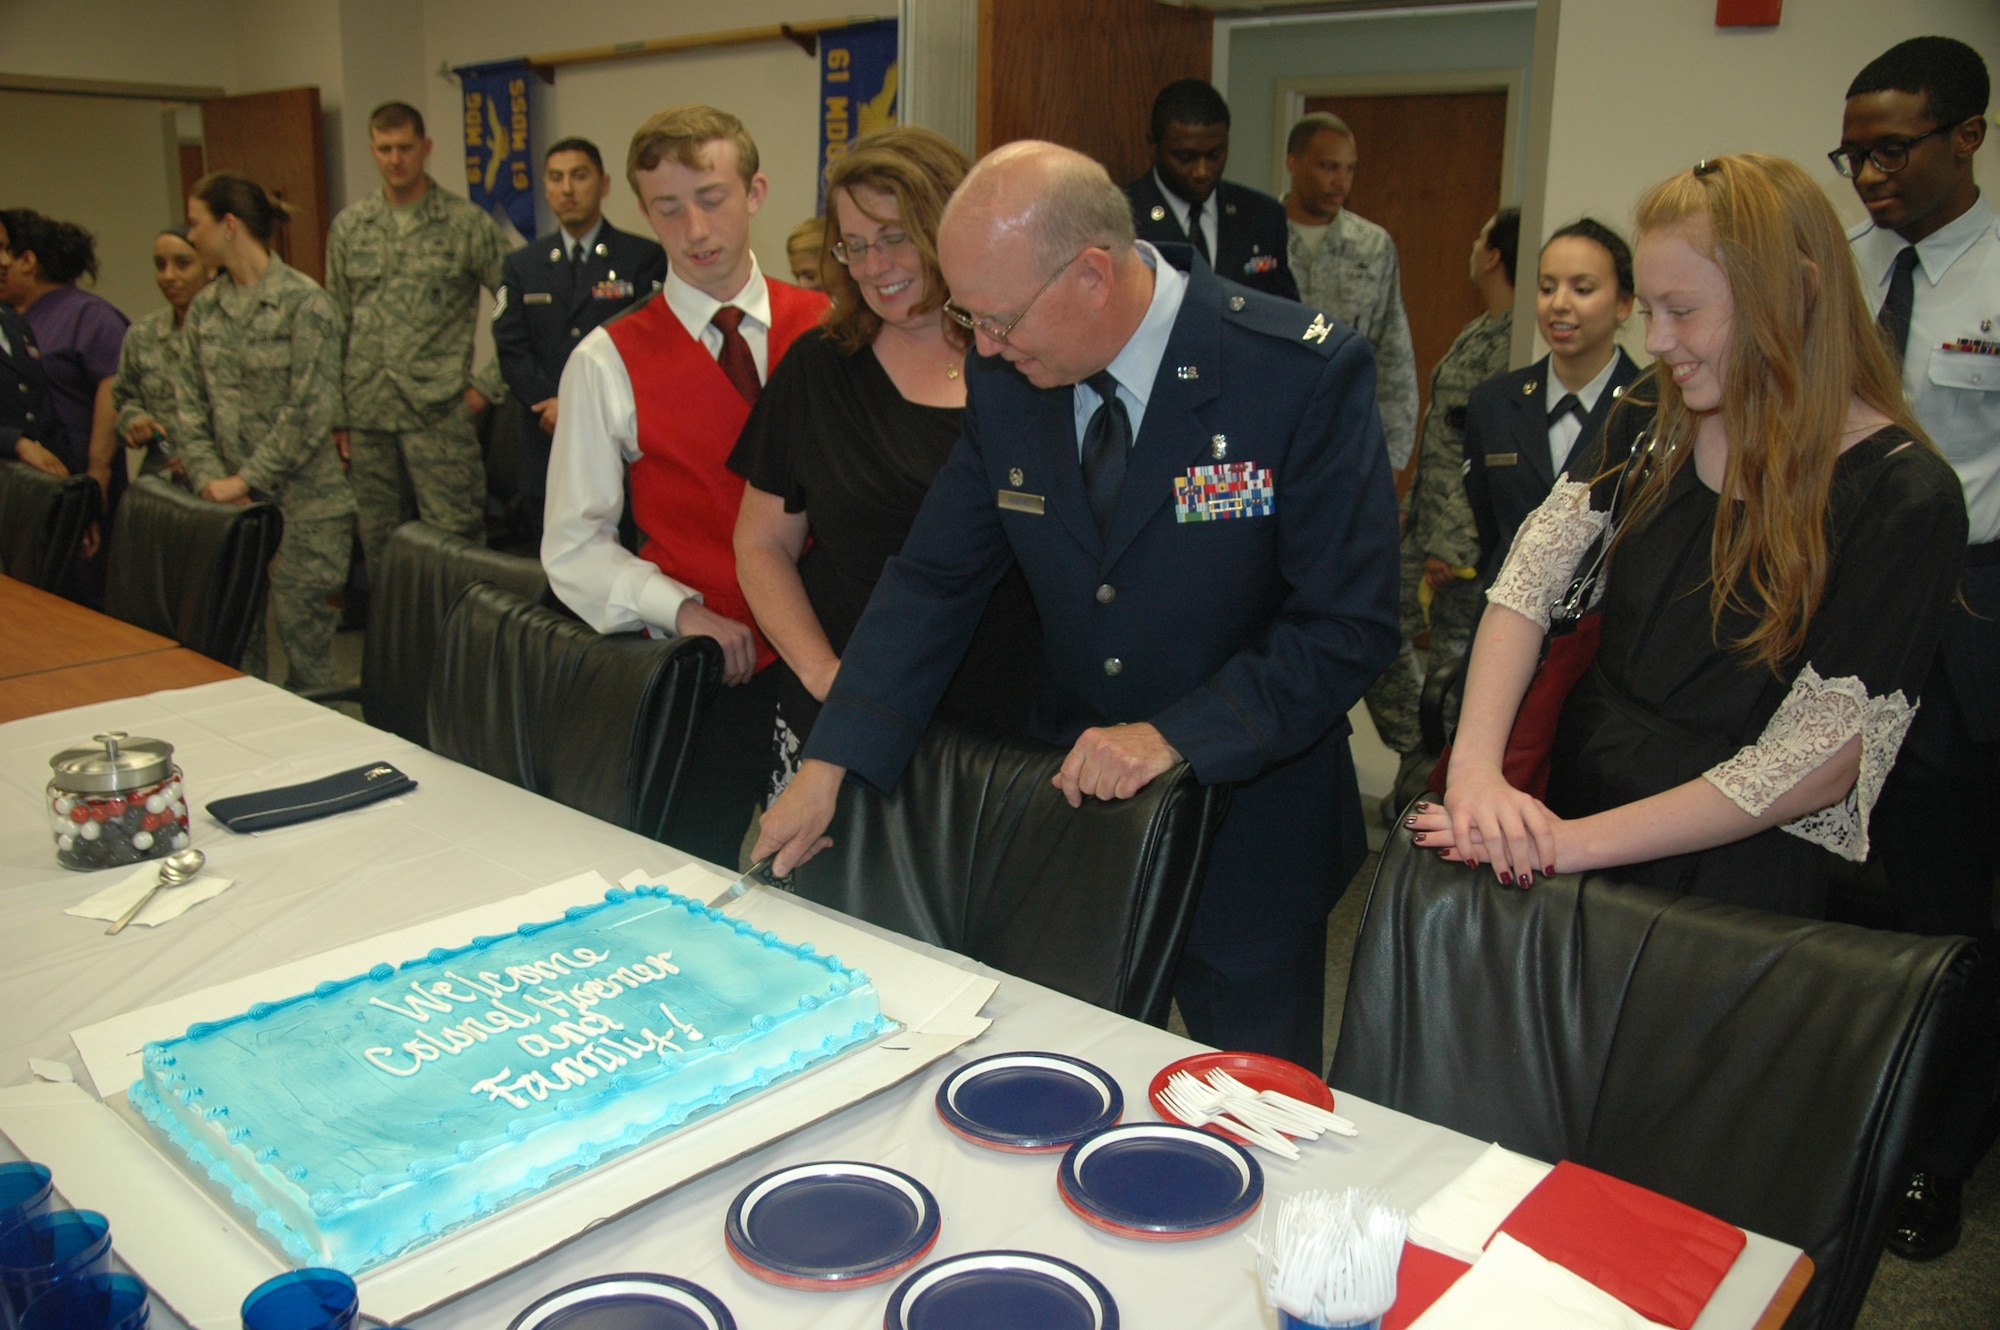 Col. (Dr.) Paul J. Hoerner, incoming 61st Medical Squadron commander cuts into a ceremonial cake welcoming him, his wife Karen, son Ryan and daughter Rachel. As the newest commander of the 61st MDS, Hoerner is responsible for ensuring more than 1,200 active duty personnel assigned to the Space and Missile Systems Center at Los Angeles Air Force Base are medically fit and ready for contingency (natural disasters and wartime) operations. He commands a staff of 178 active duty, government civilians and contract medical staff providing care for more than 171,000 eligible patients across the greater Los Angeles metropolitan area. (U.S. Air Force photo/Jim Spellman) 